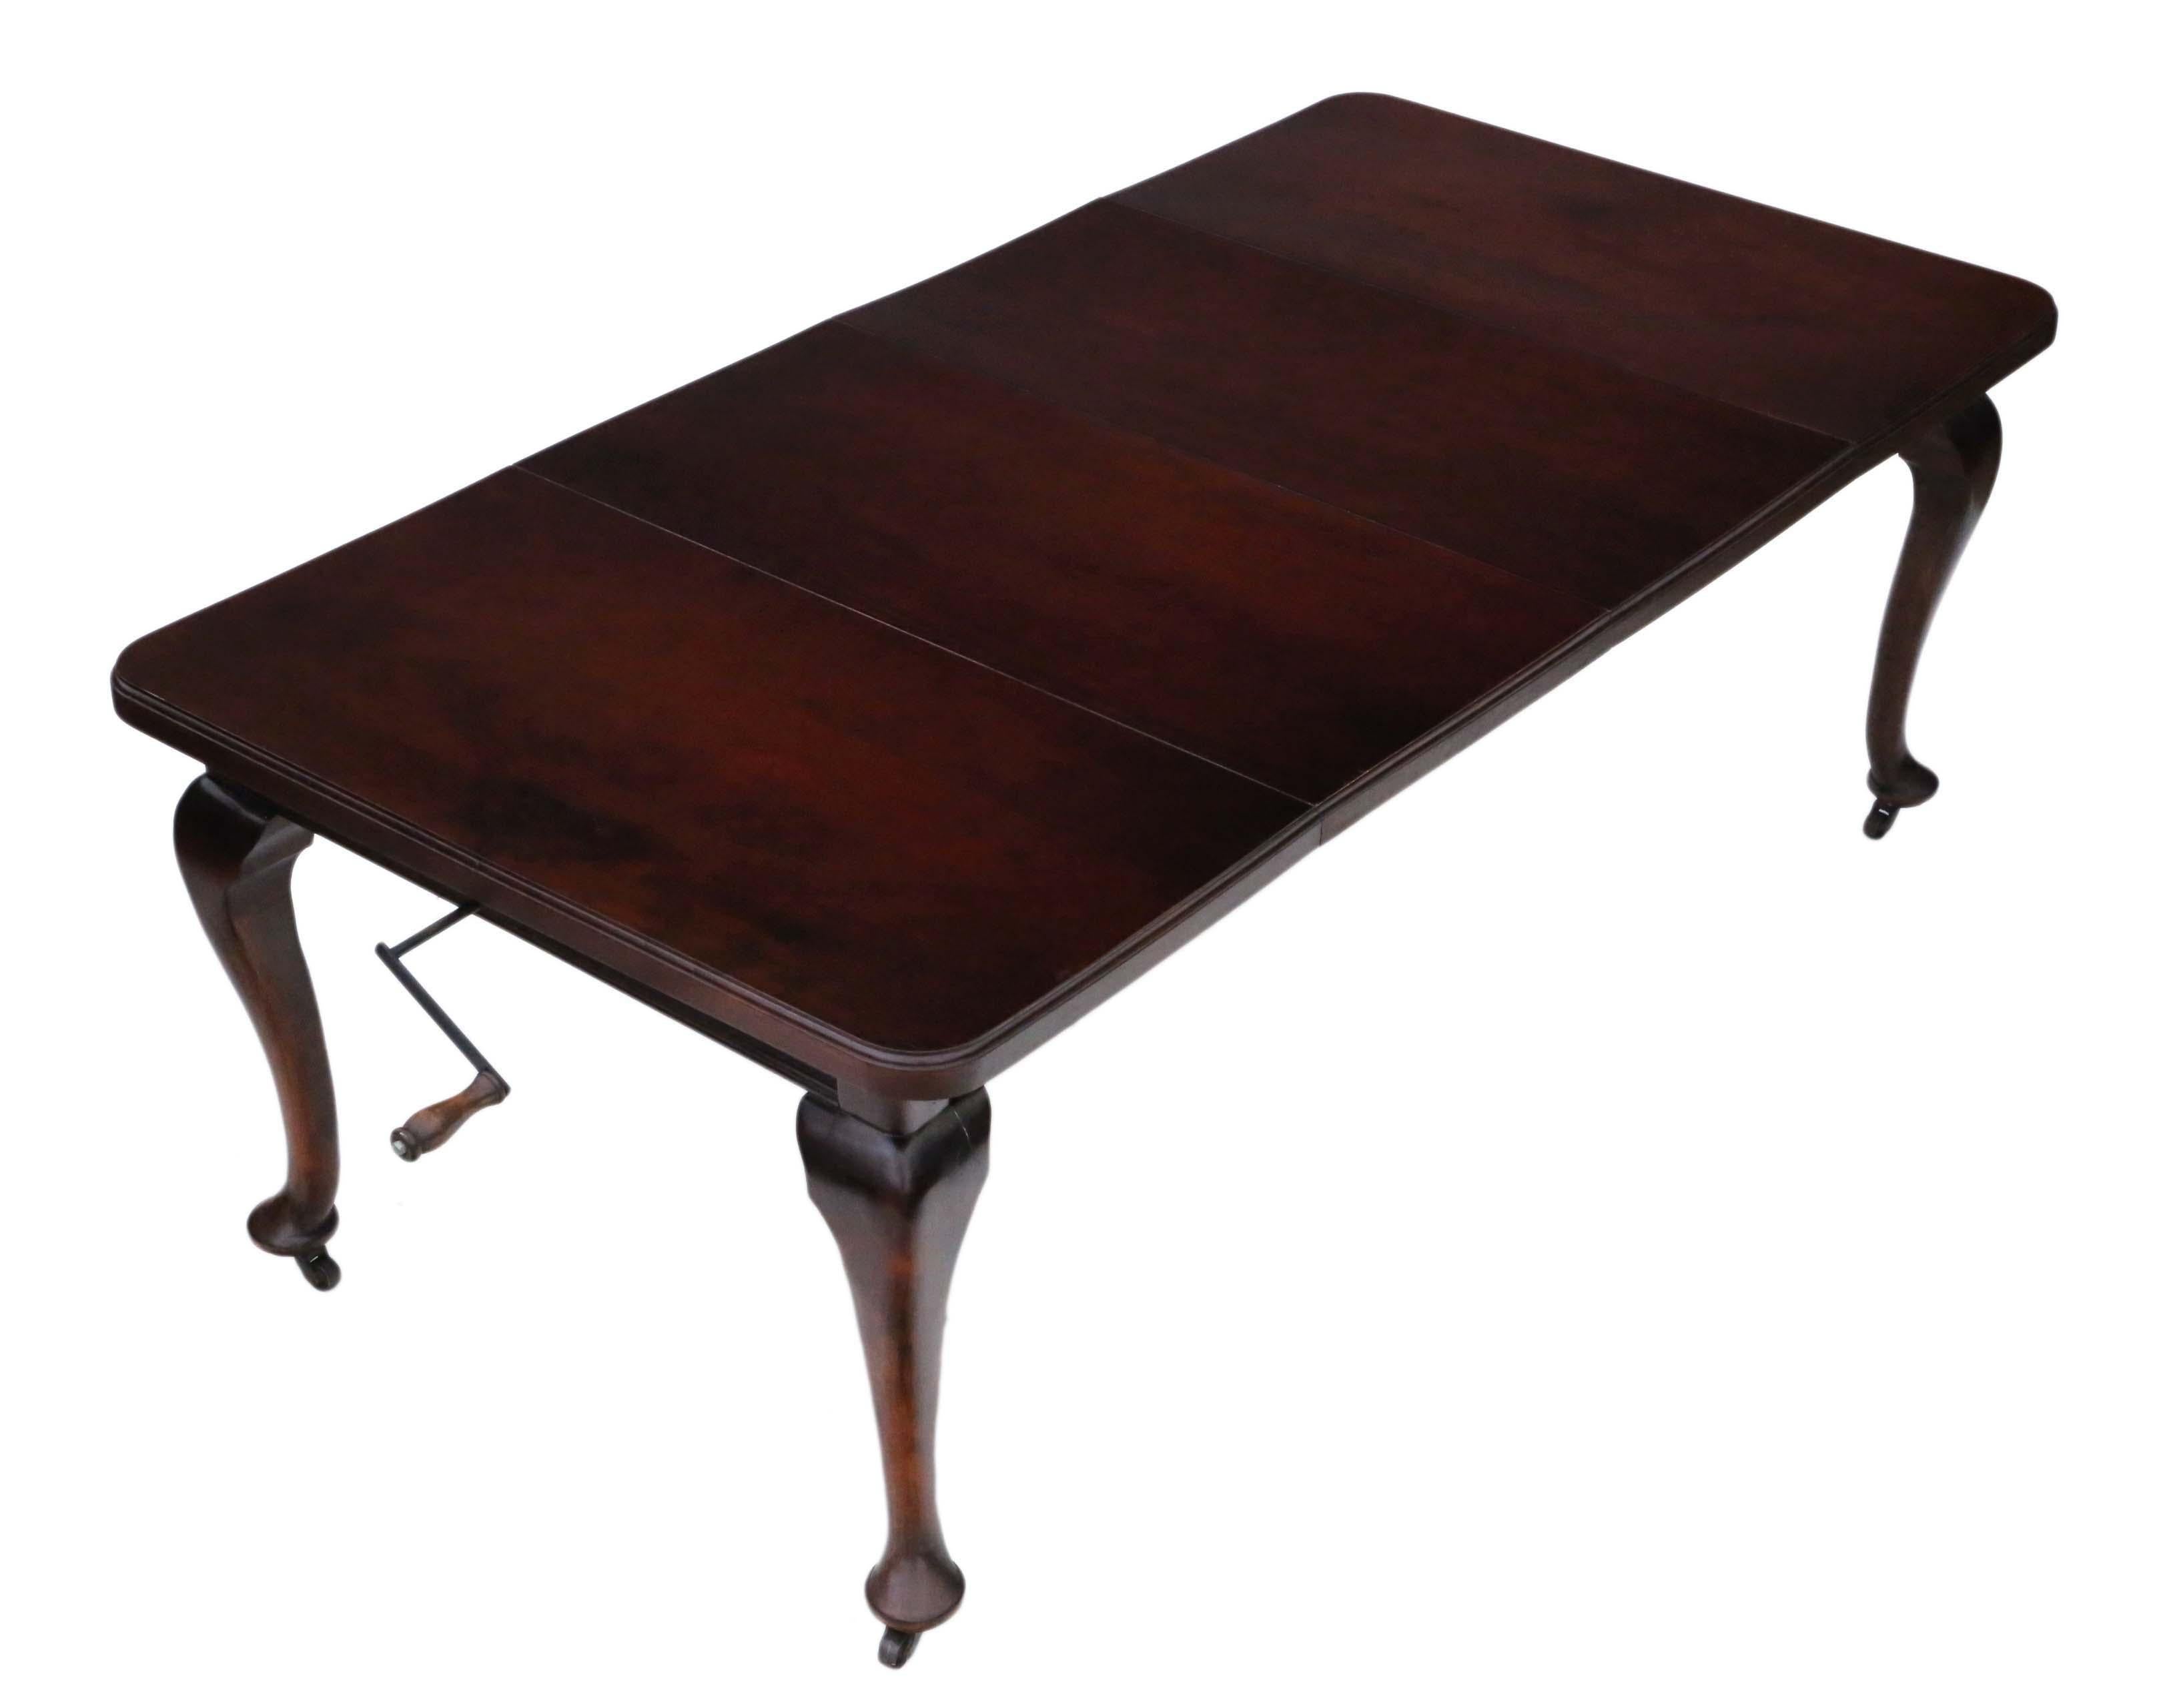 Antique large 2-leaf mahogany wind-out extending dining table. Measures: 6'8